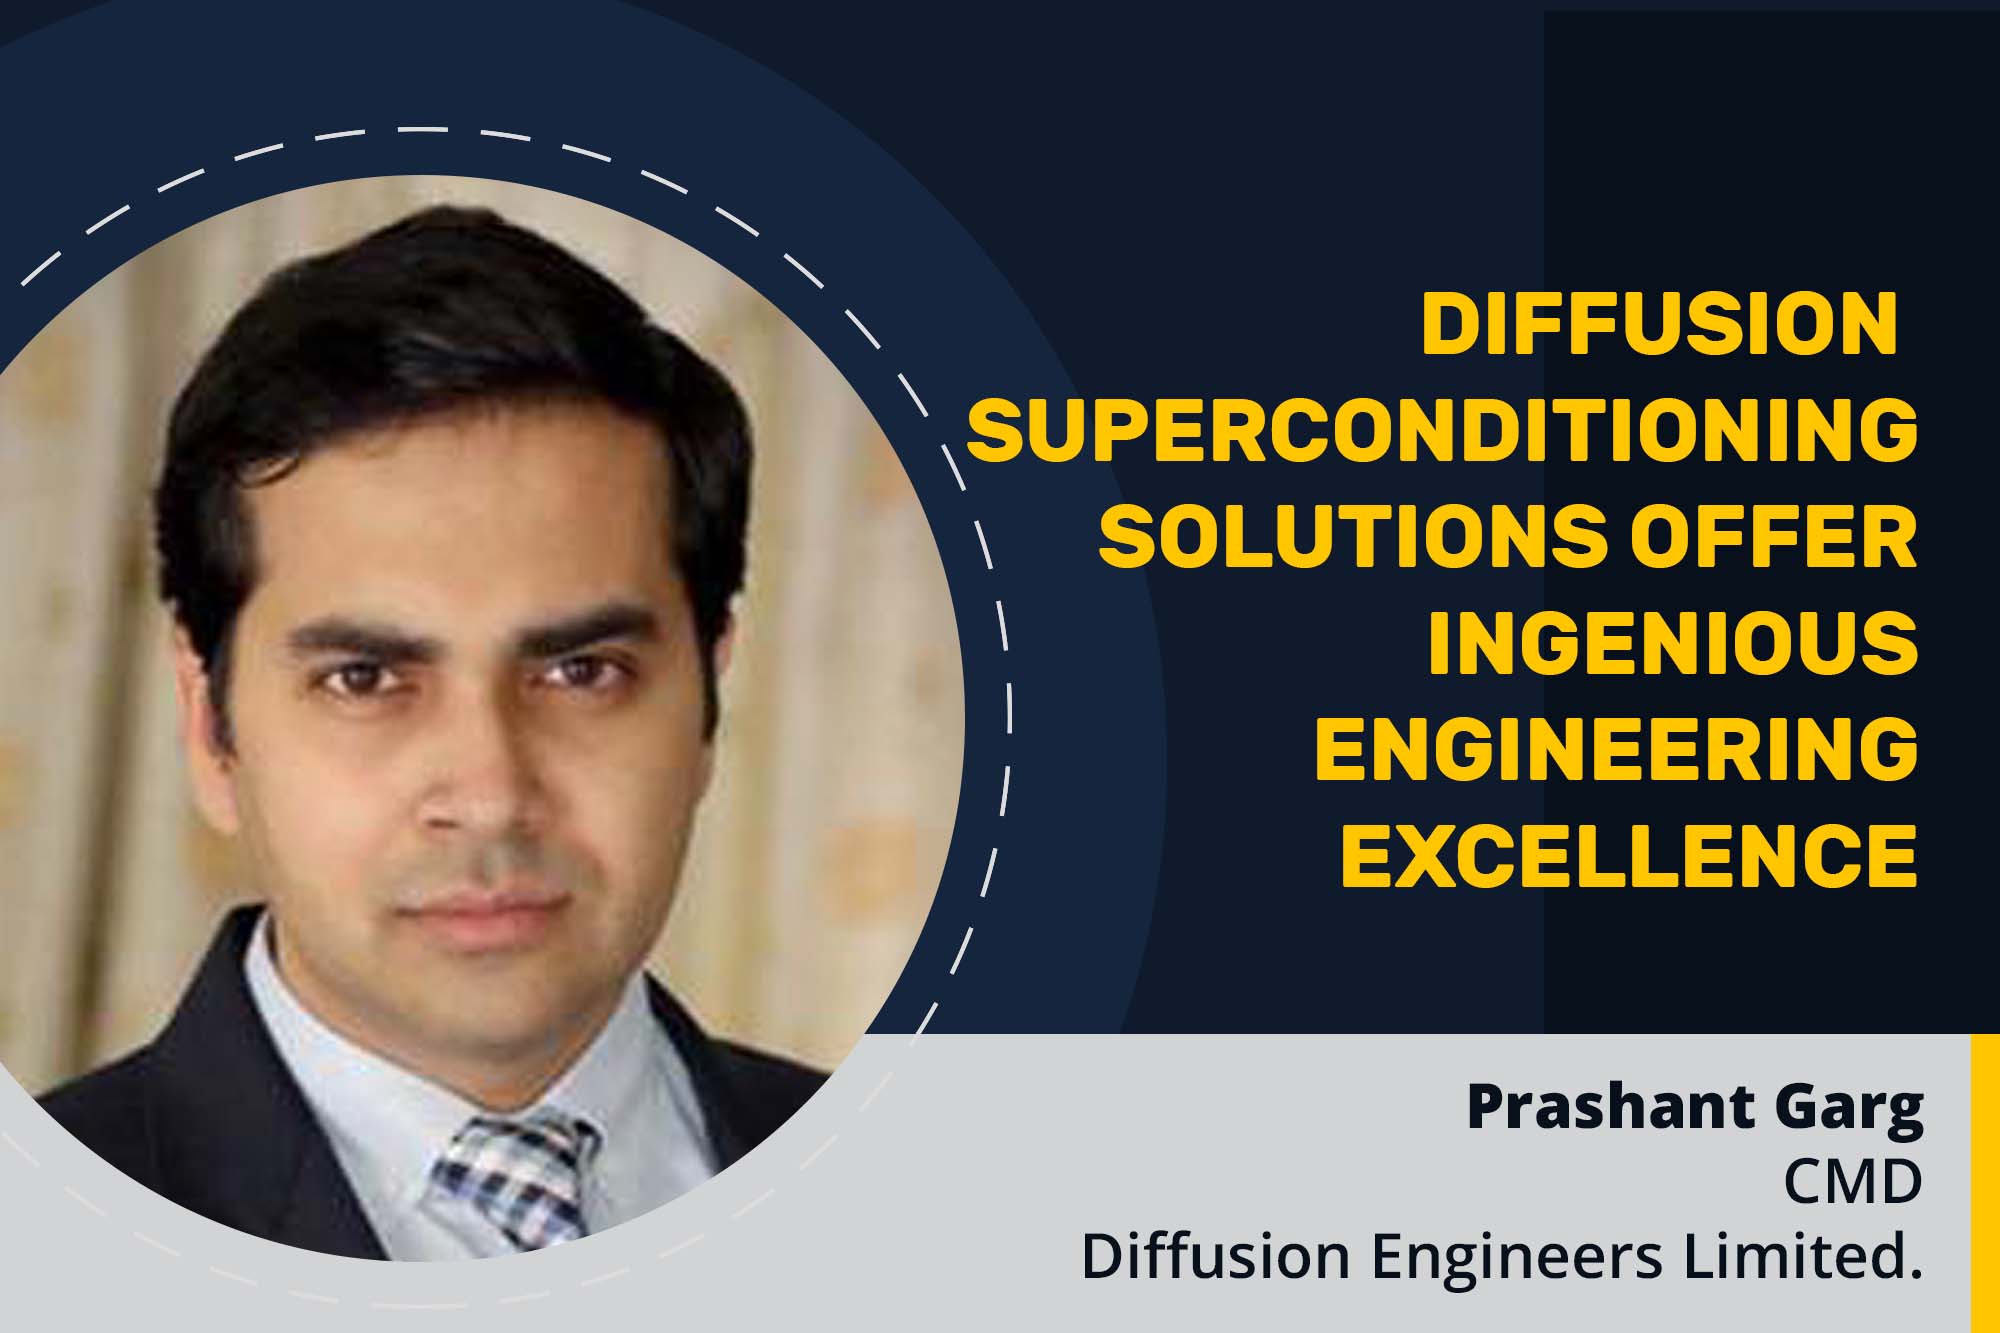 Diffusion Superconditioning Solutions offers ingenious engineering solutions